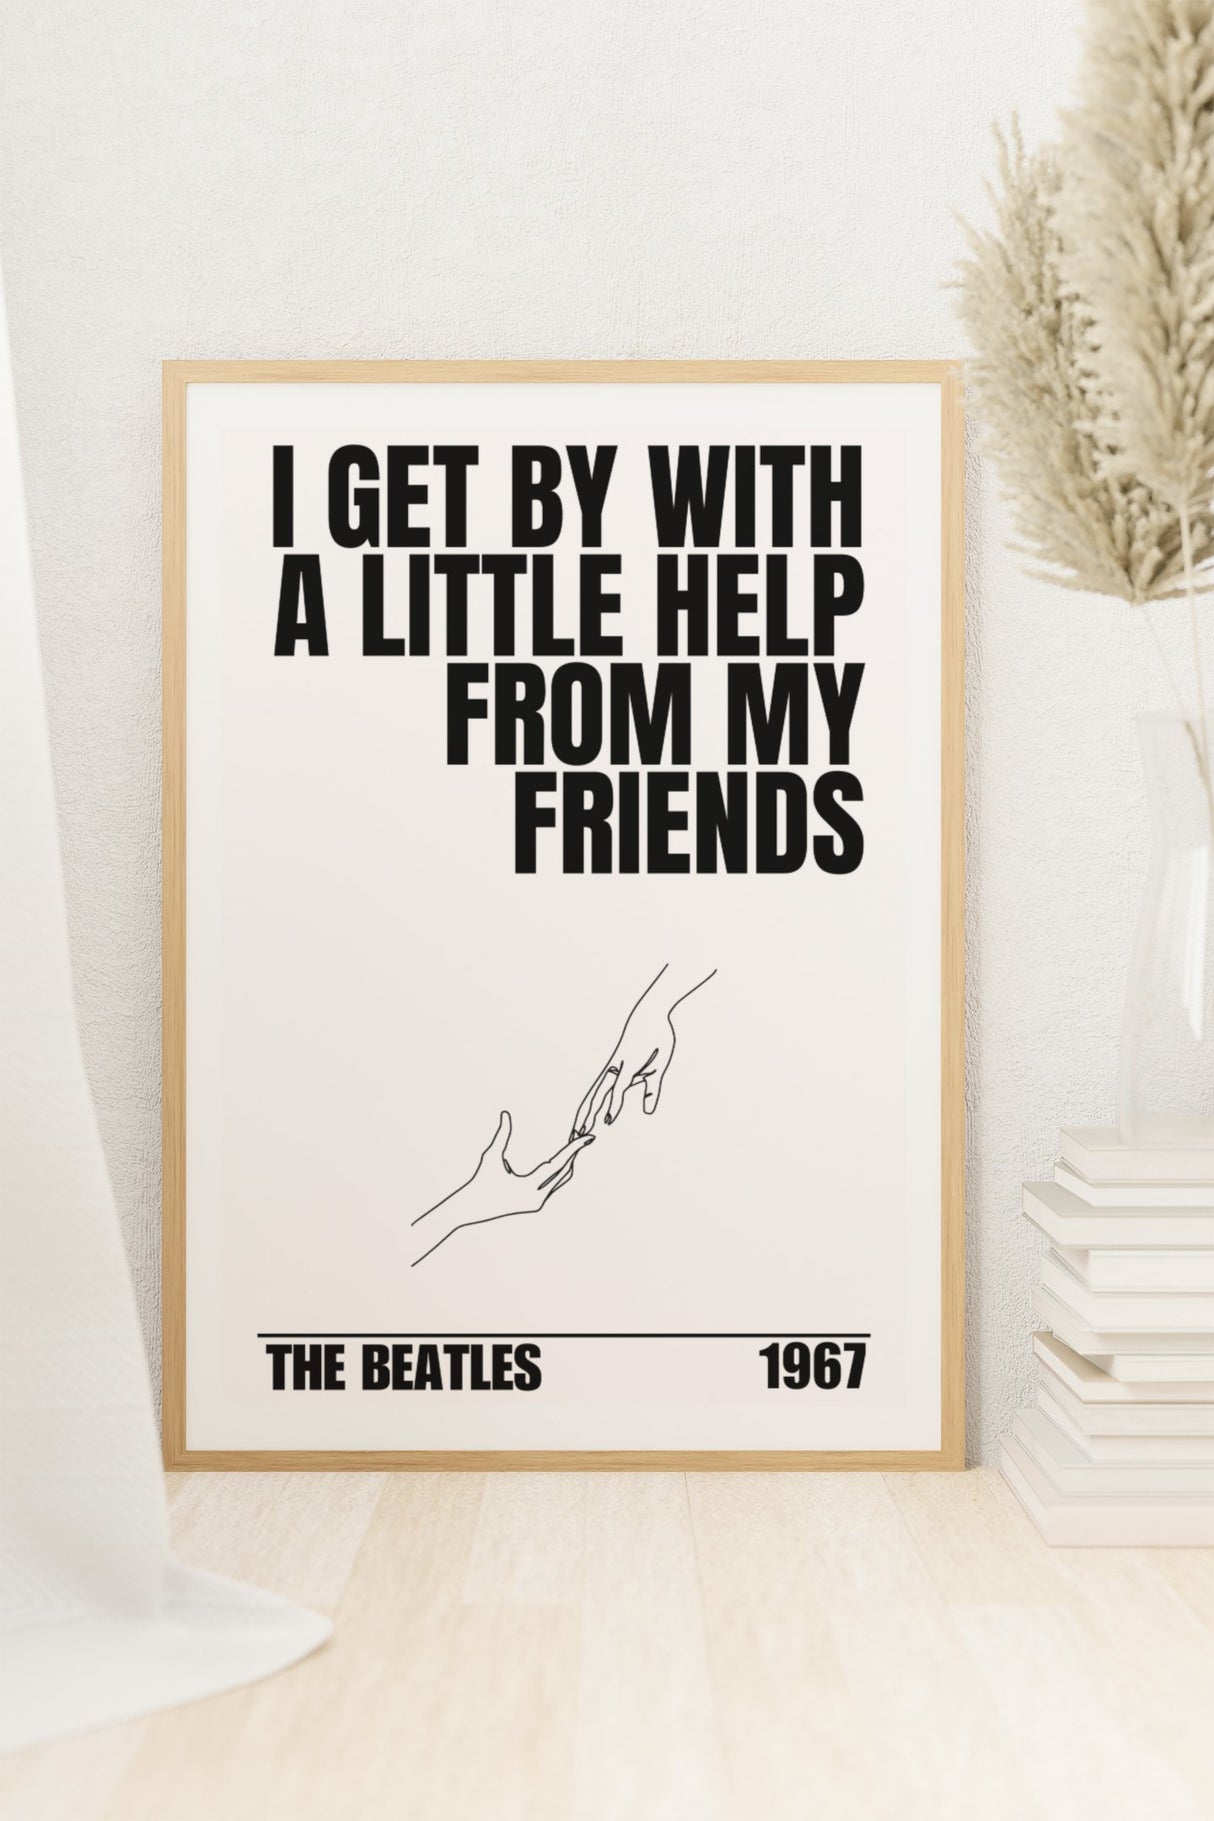 The Beatles - With a Little Help from My Friends Lyrics - Setlist